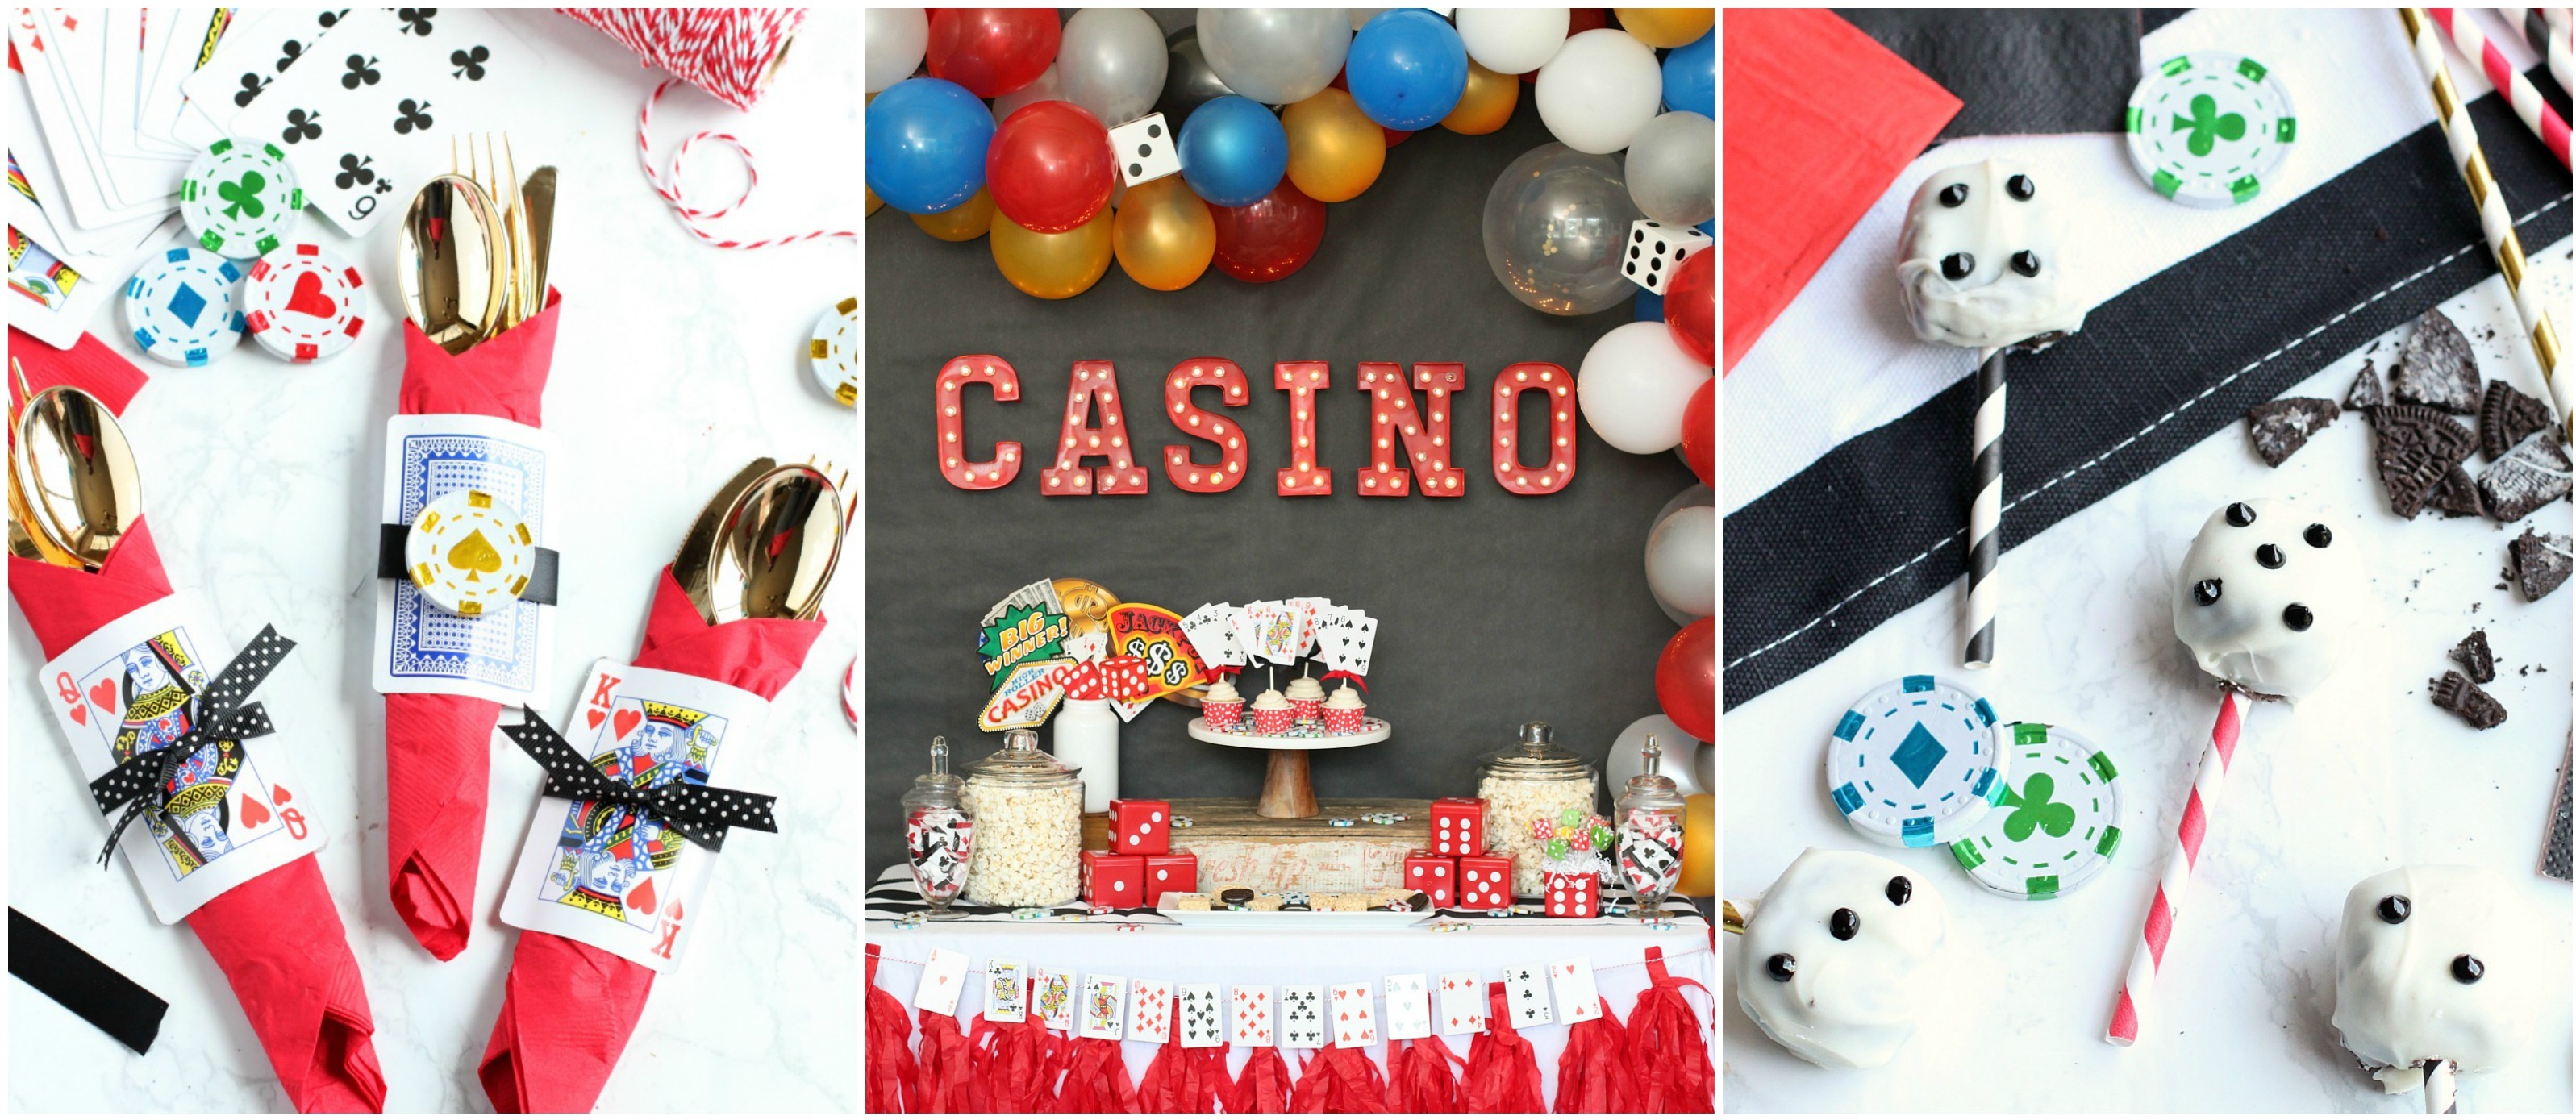 Step-by-Step DIY Party Decor Tips - Casino Knights